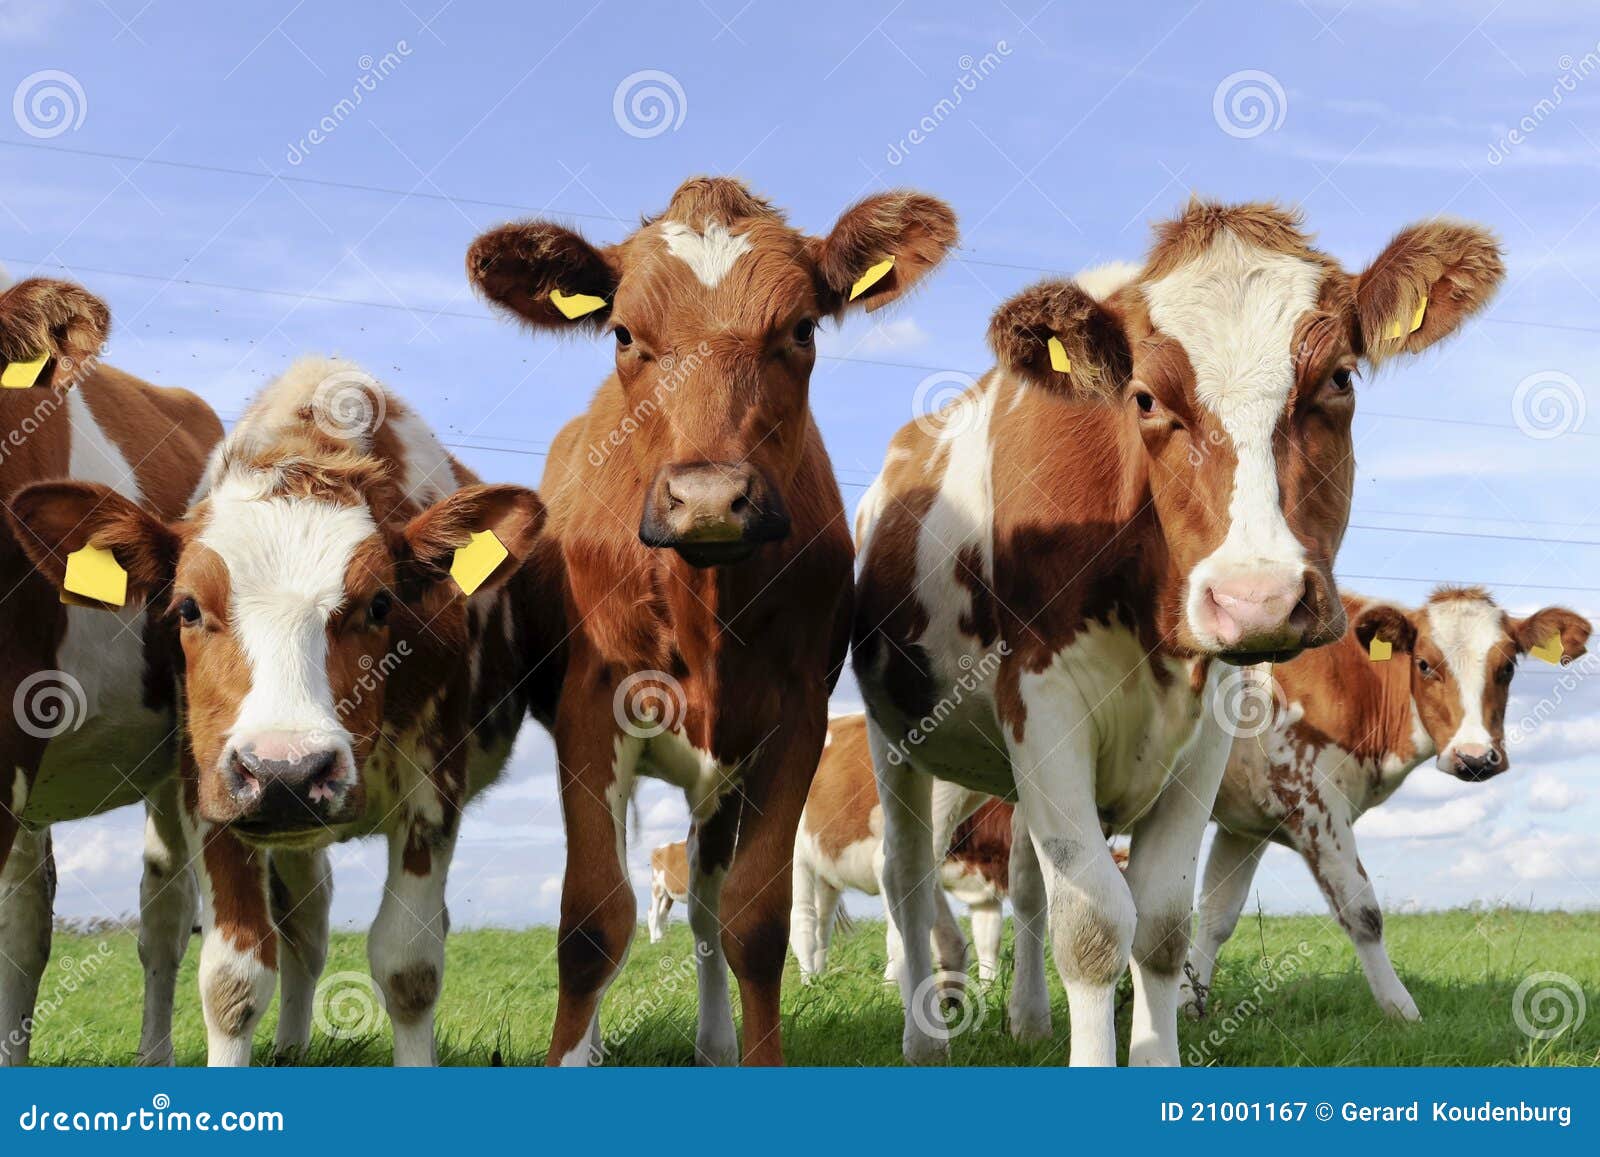 cattle of young cows